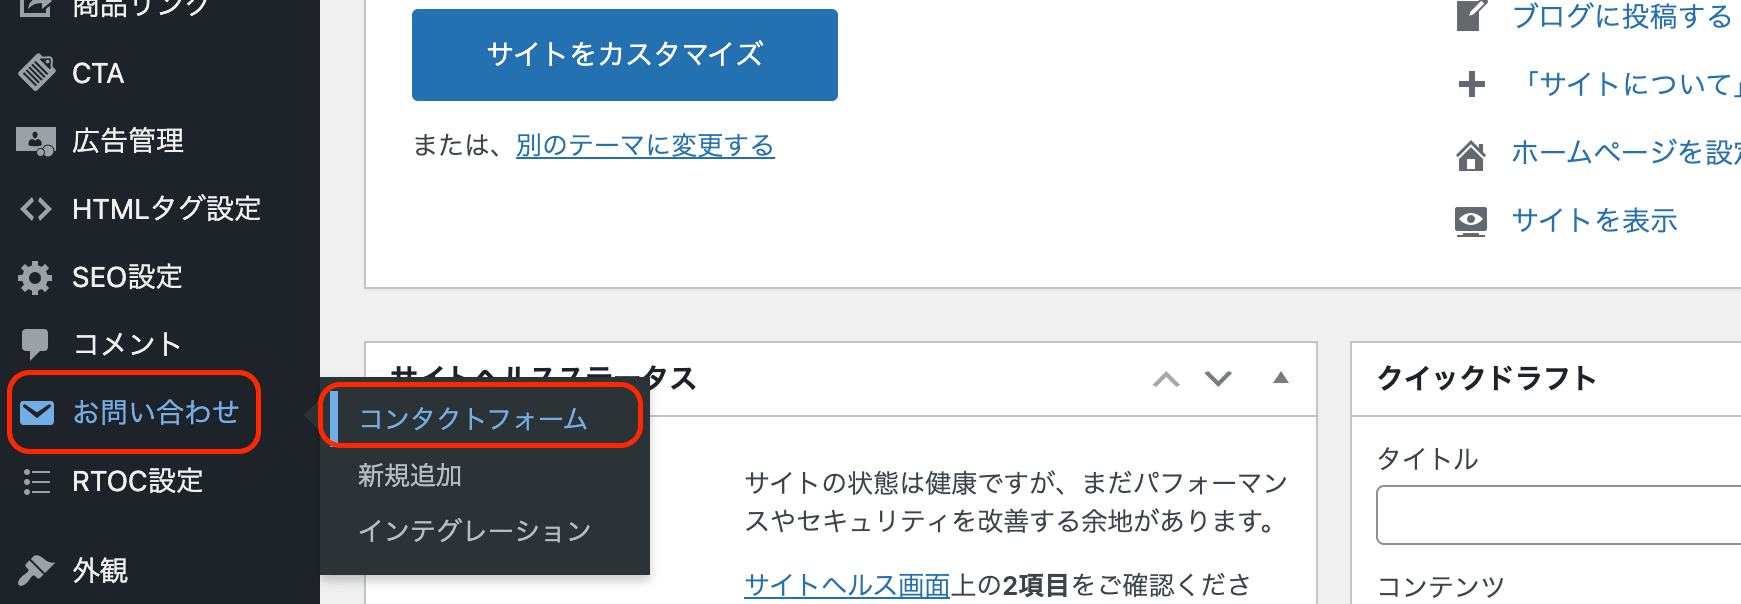 Contact form7の応用設定